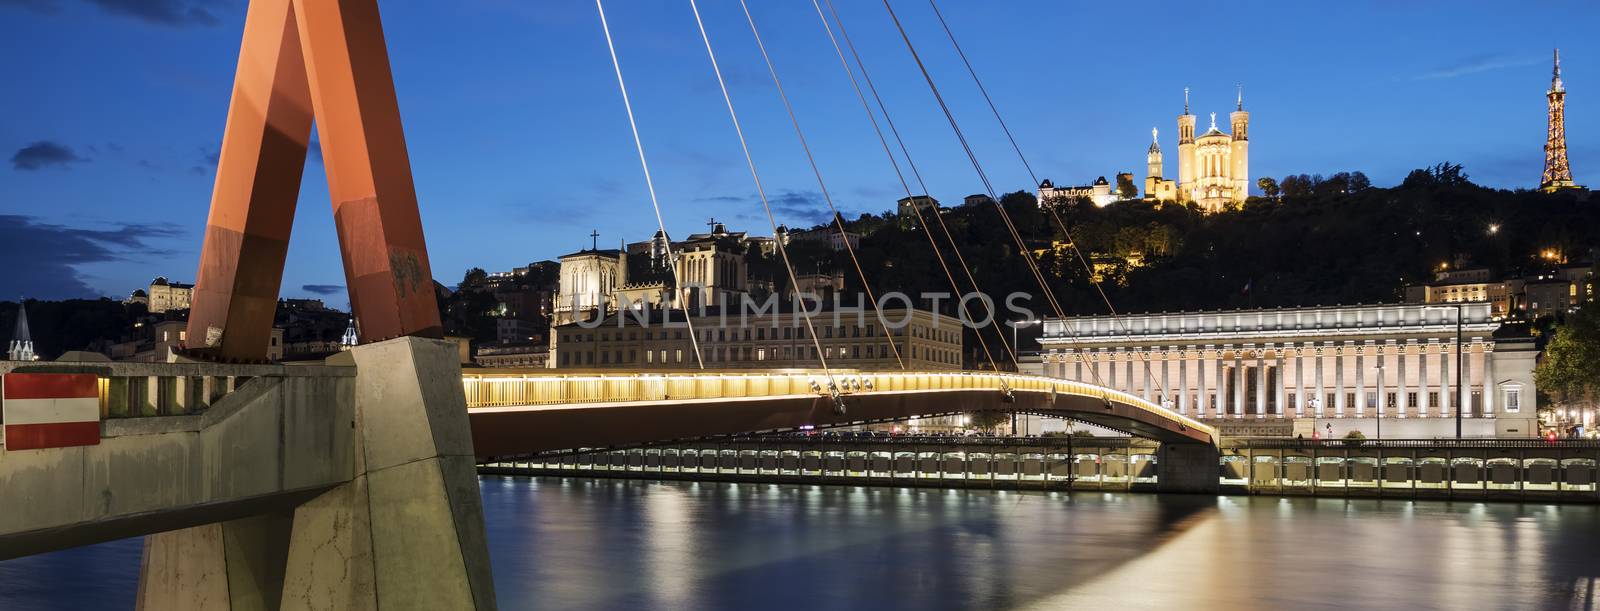 View of Saone river by night, Lyon, France.